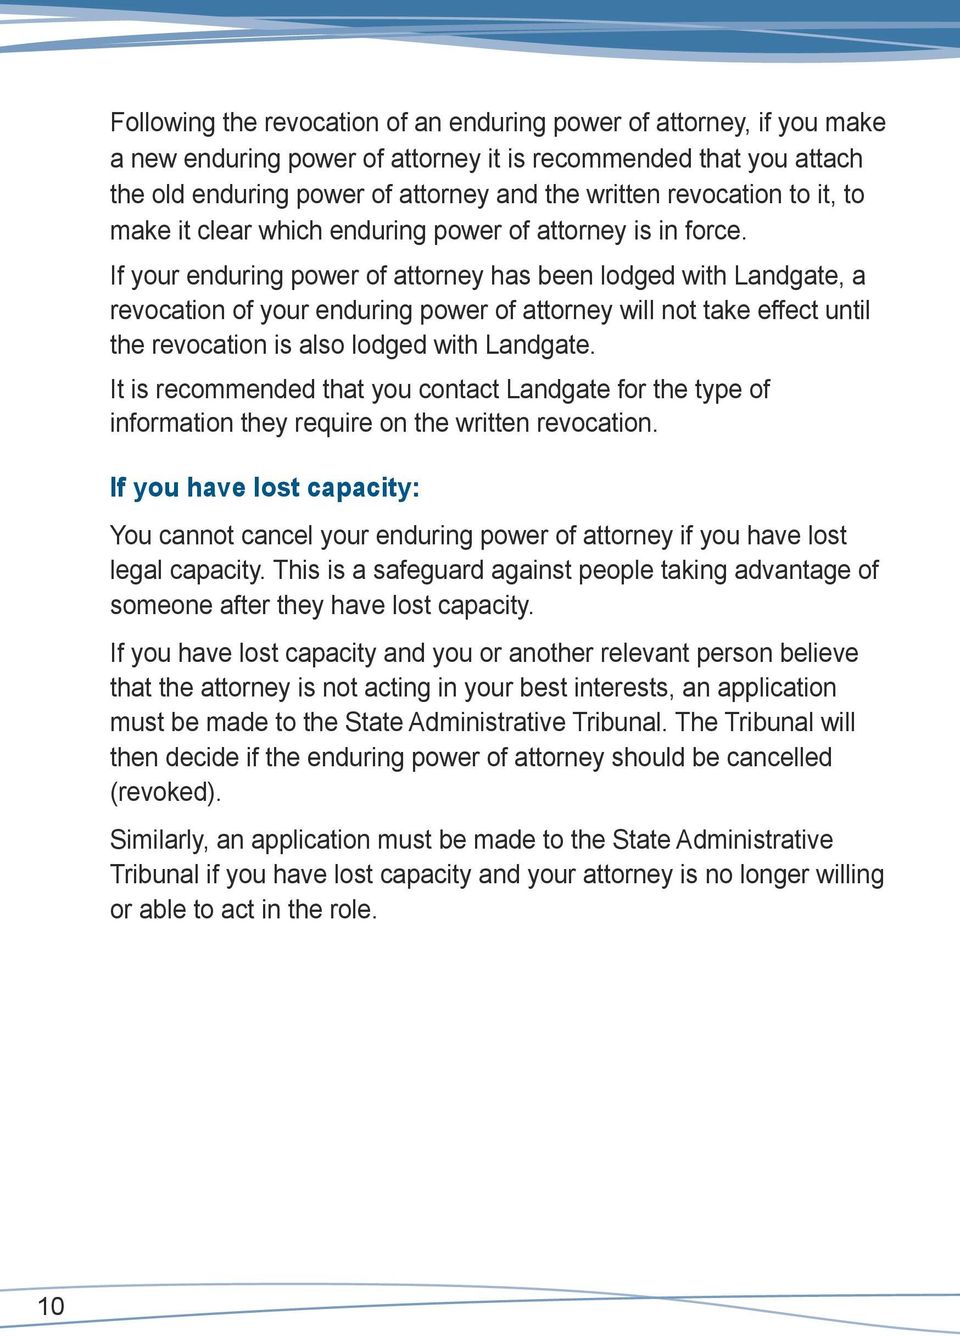 If your enduring power of attorney has been lodged with Landgate, a revocation of your enduring power of attorney will not take effect until the revocation is also lodged with Landgate.